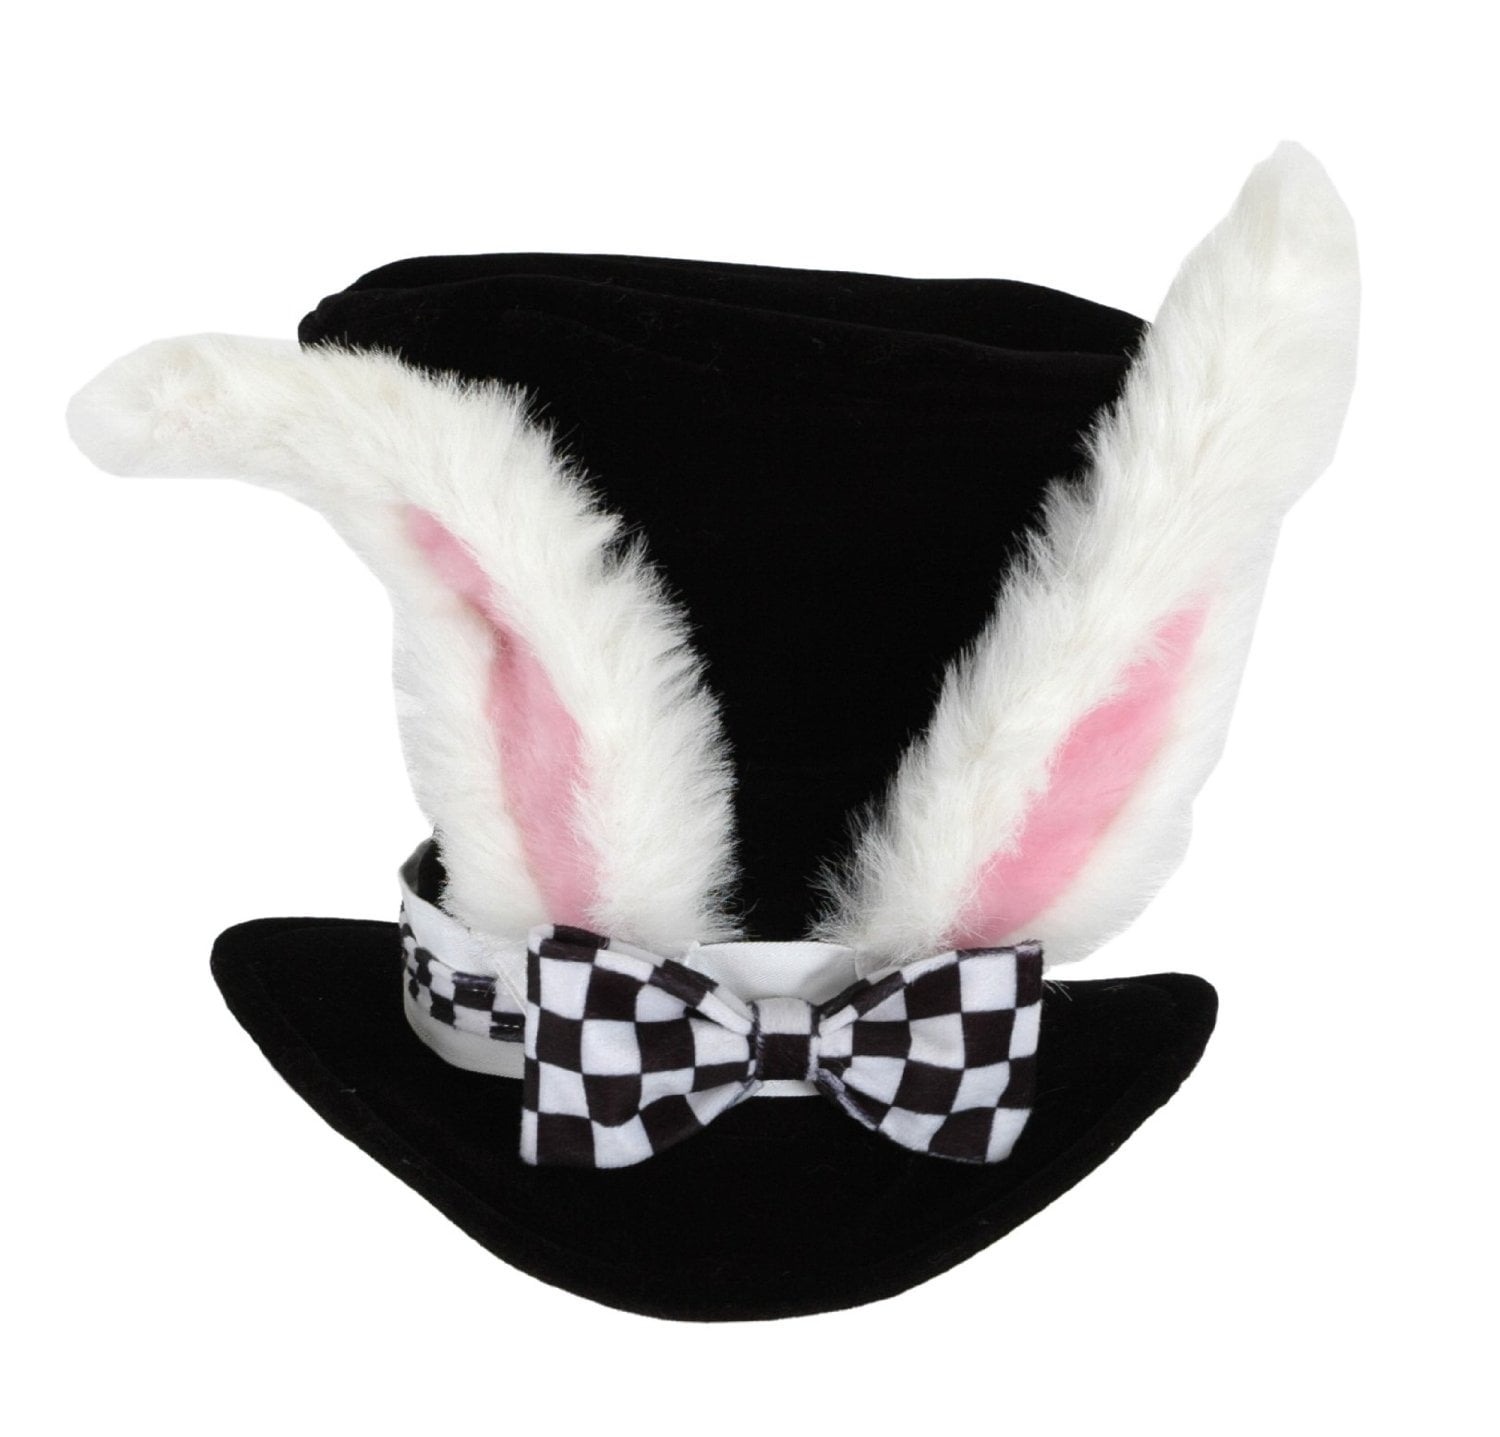 WHITE RABBIT TOP HAT BUNNY EARS AND NOSE FANCY DRESS COSTUME OUTFIT BOOK DAY 